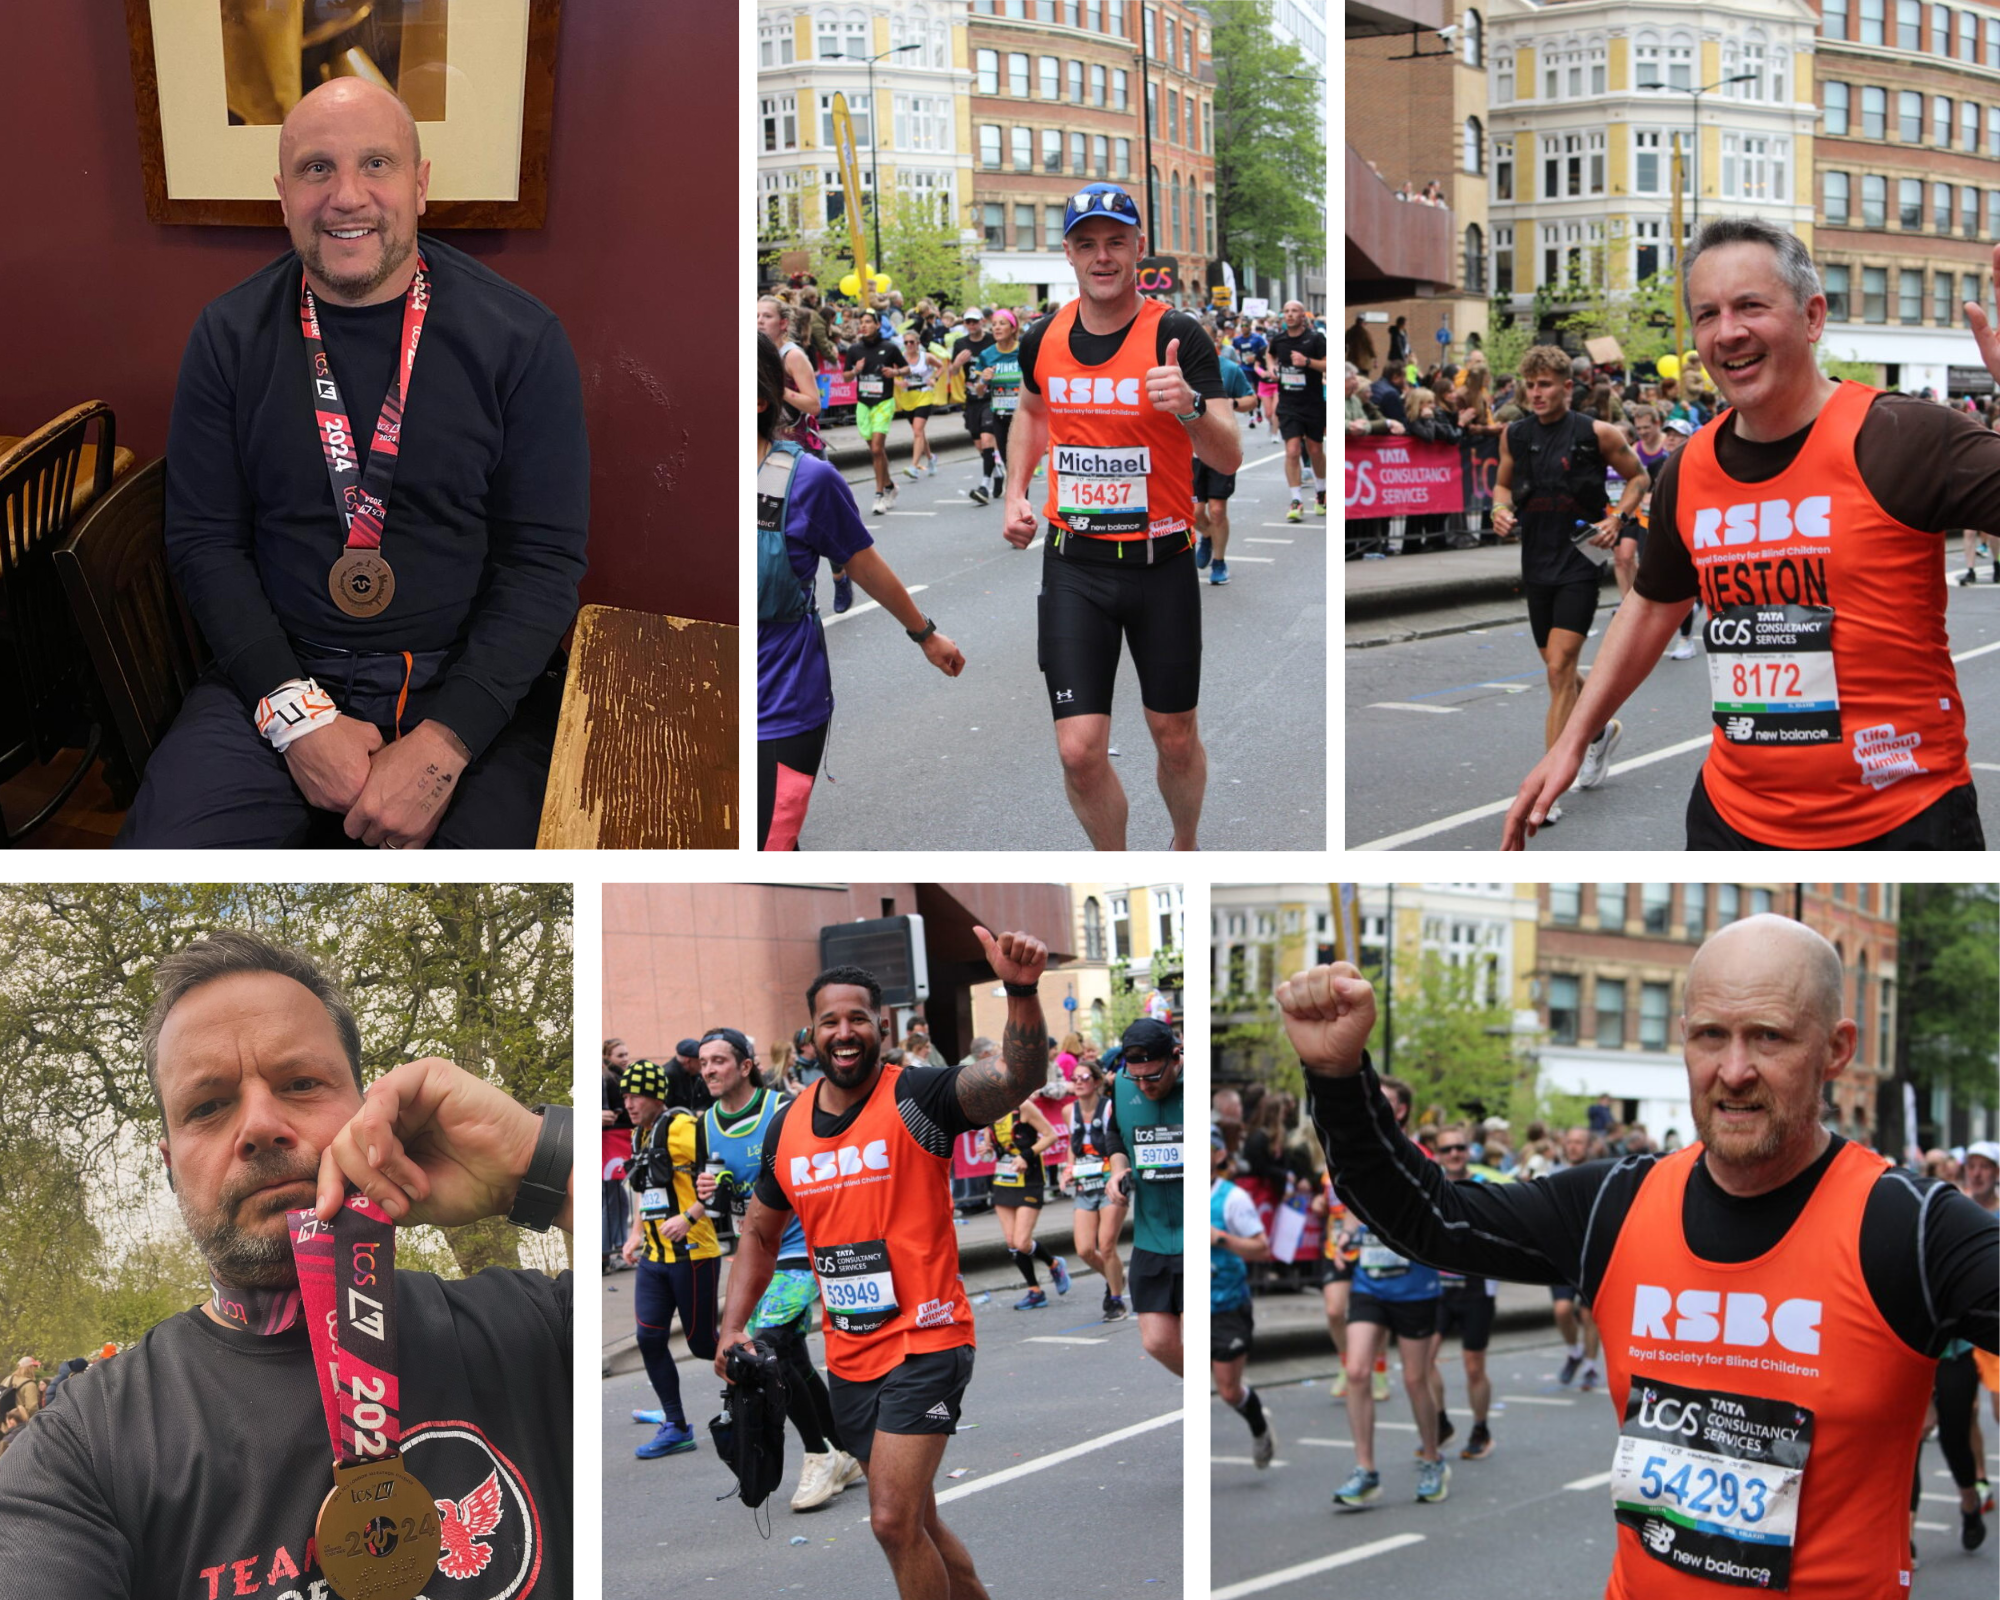 A photo album of 6 images from the London Marathon. The photos are of male runners on the street of London - some waving to the crowd, and 2 runners posing with their medals after the race.